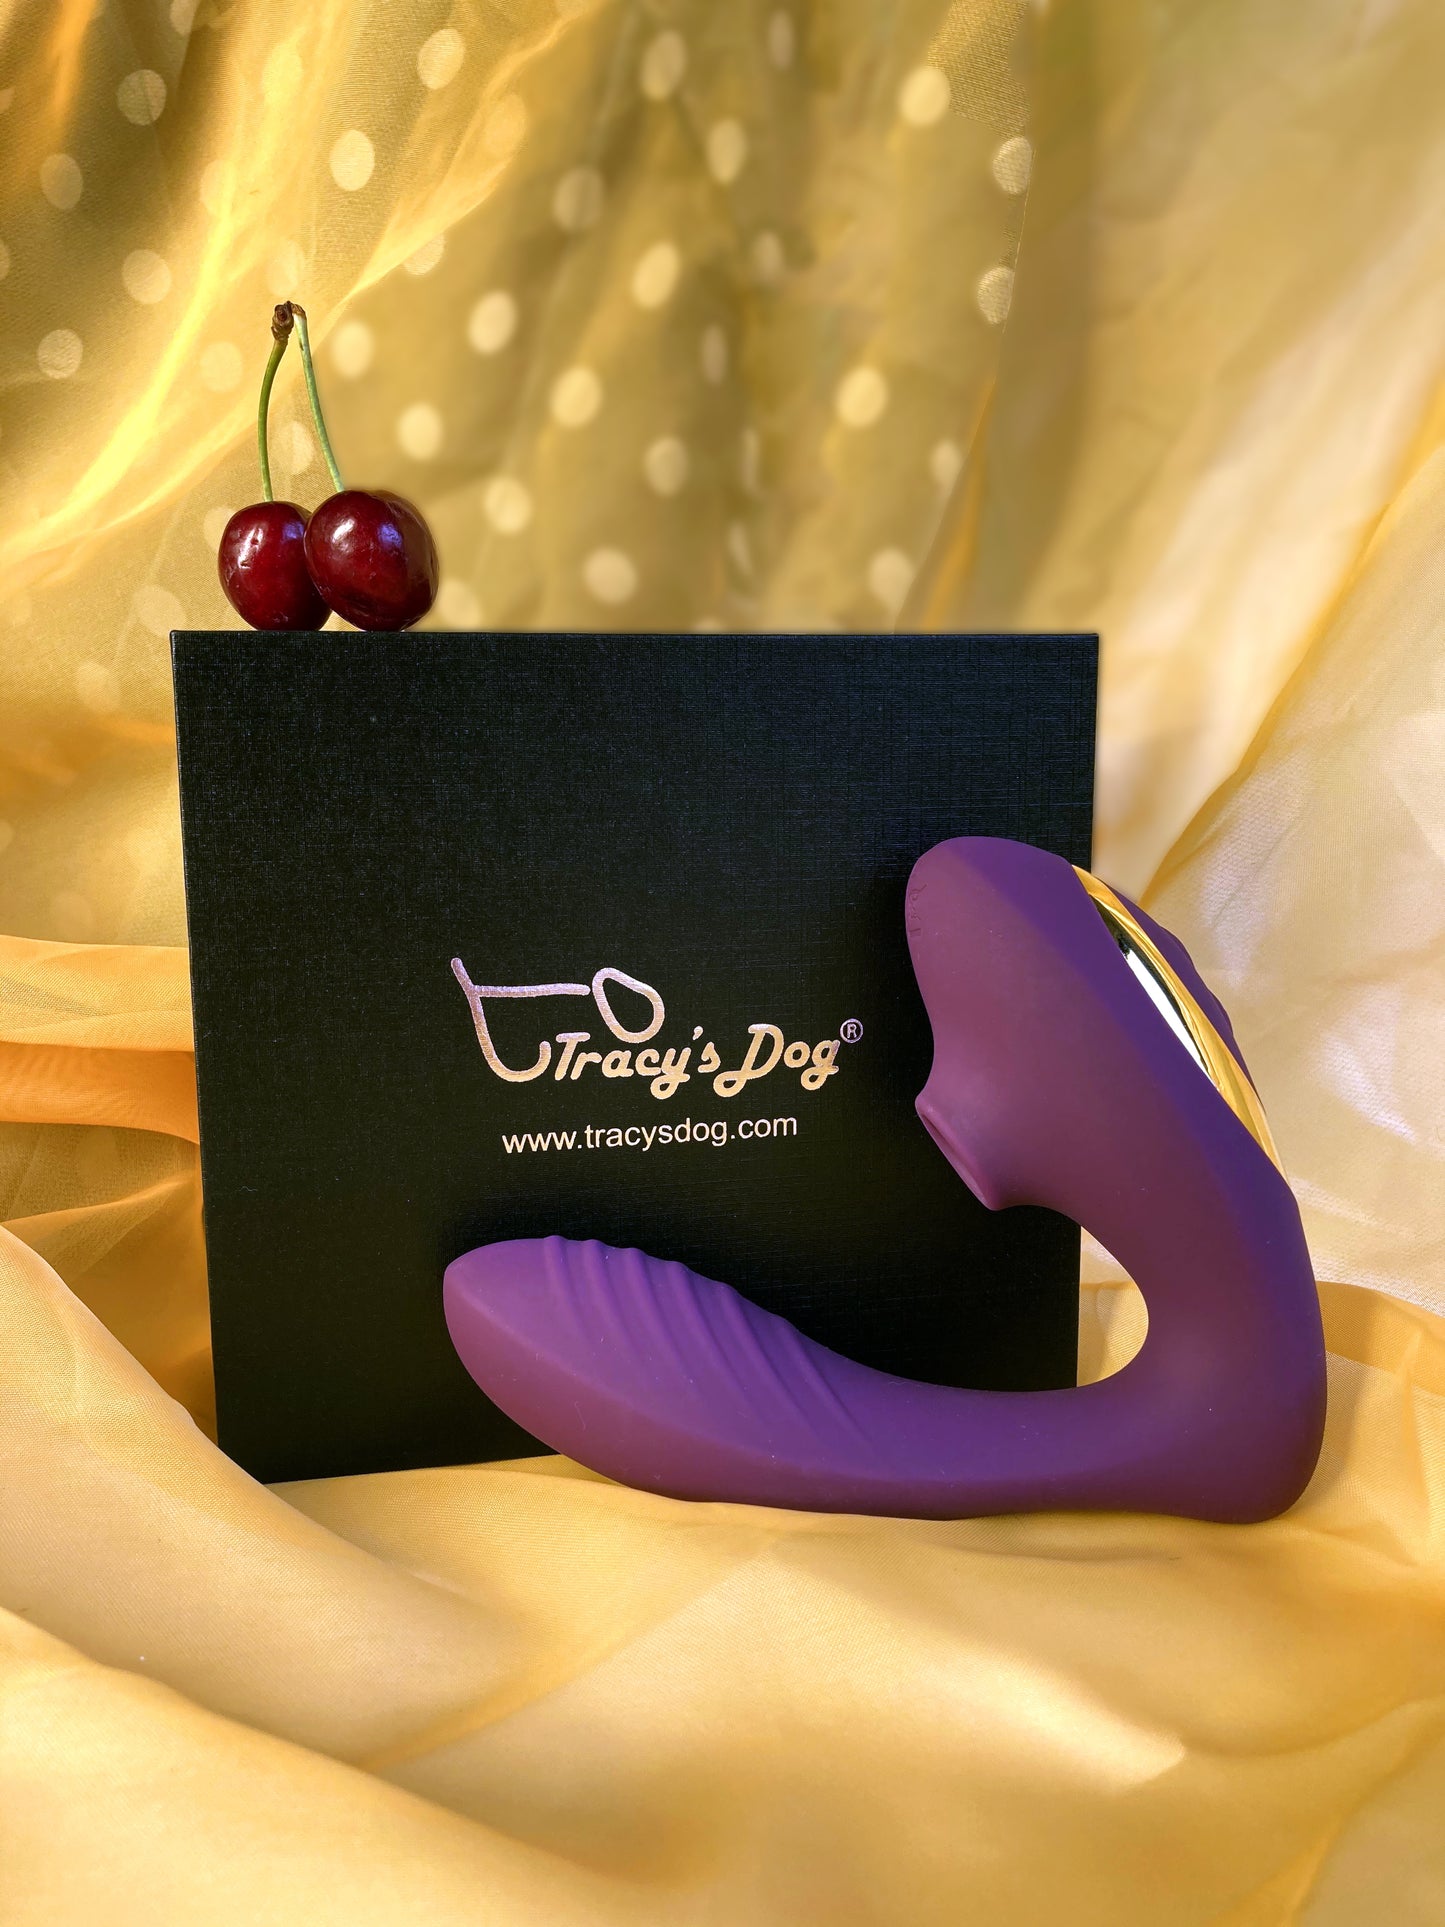 Tracy's Dog G-spot and Suction Vibrator